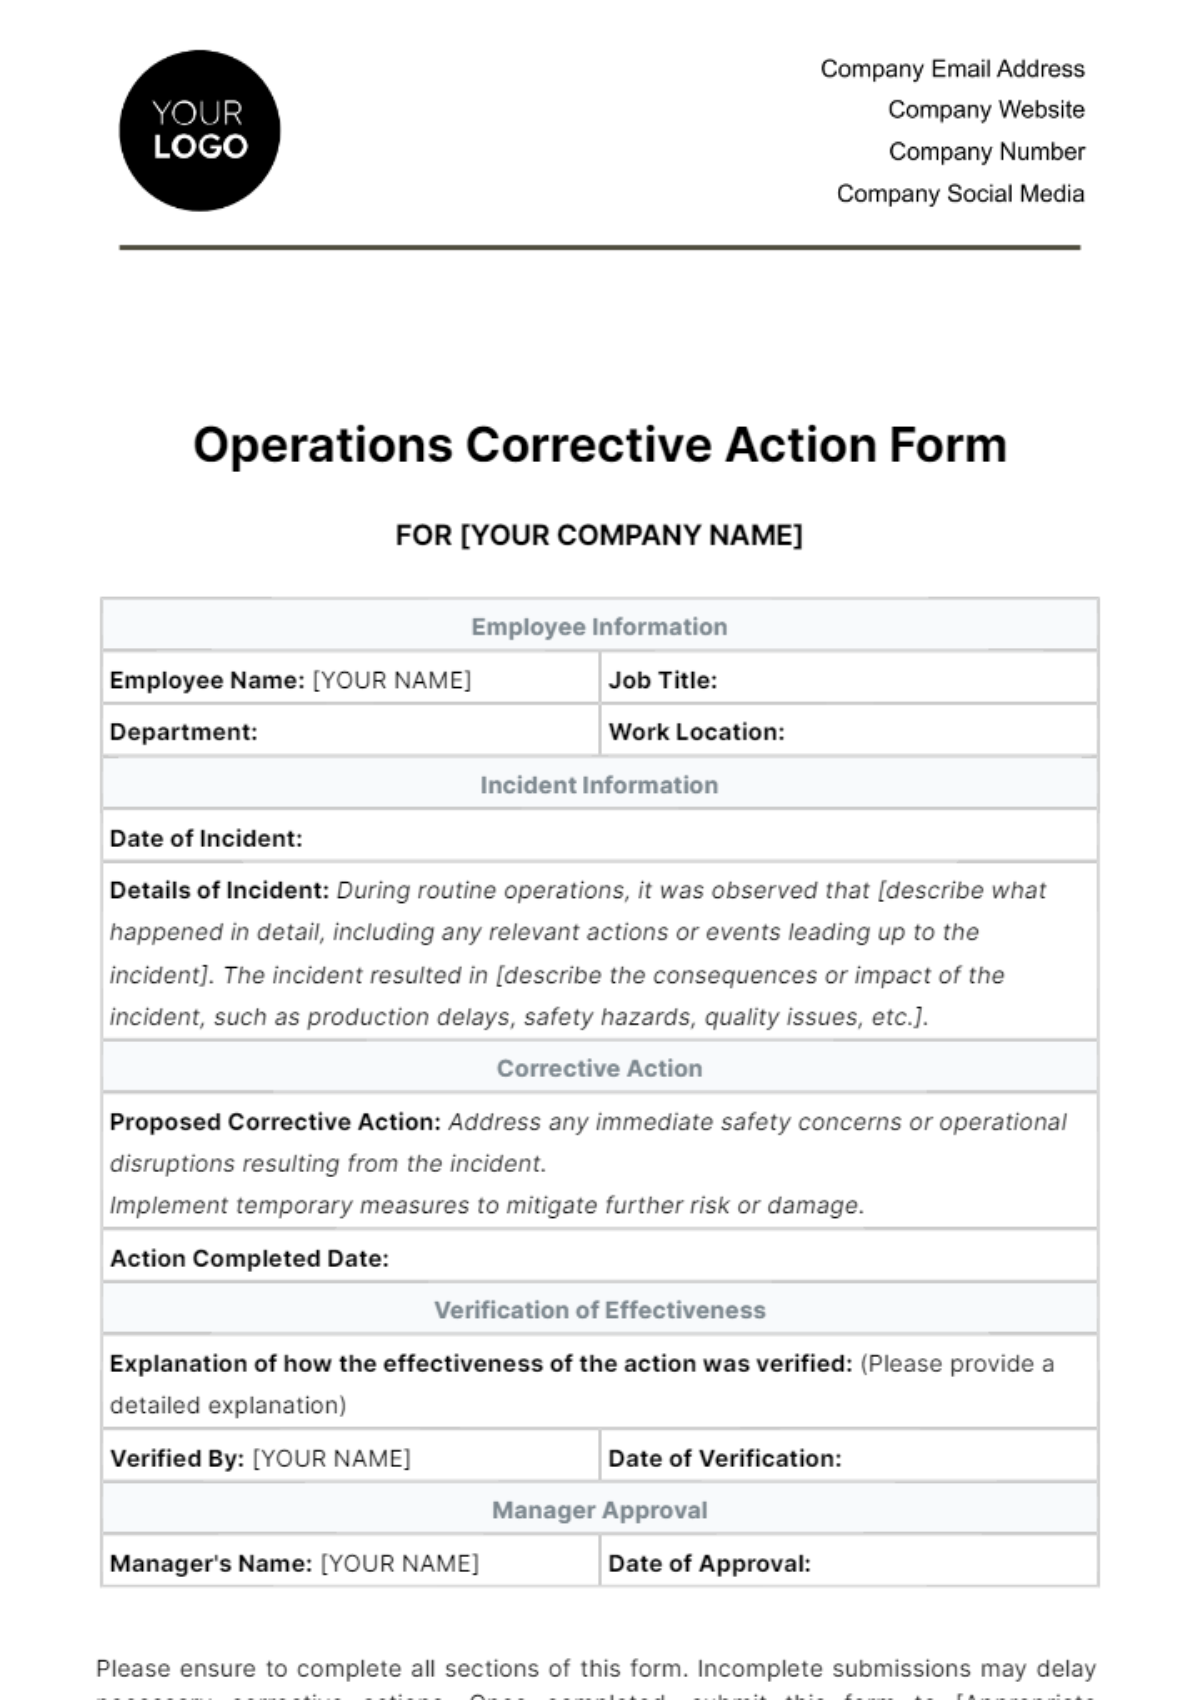 Operations Corrective Action Form Template